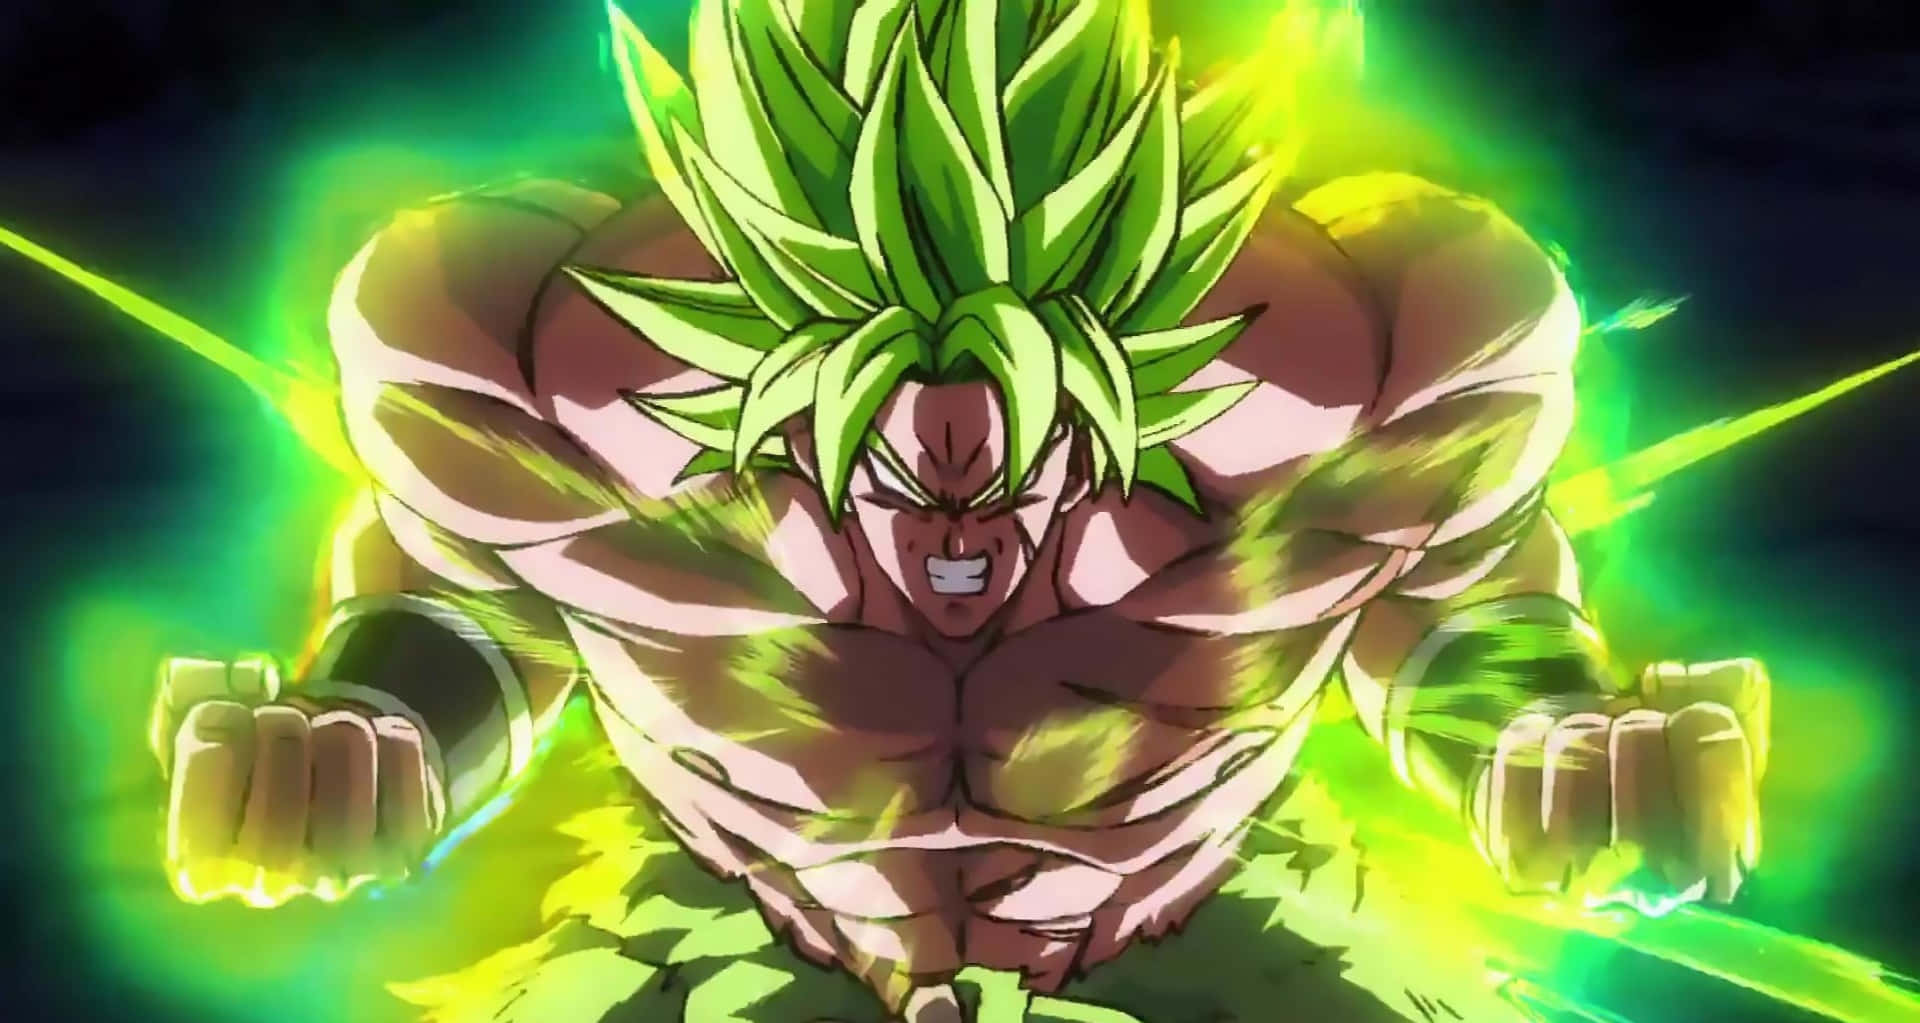 Ny Film - Dragon Ball Super Broly - Quest Tapet